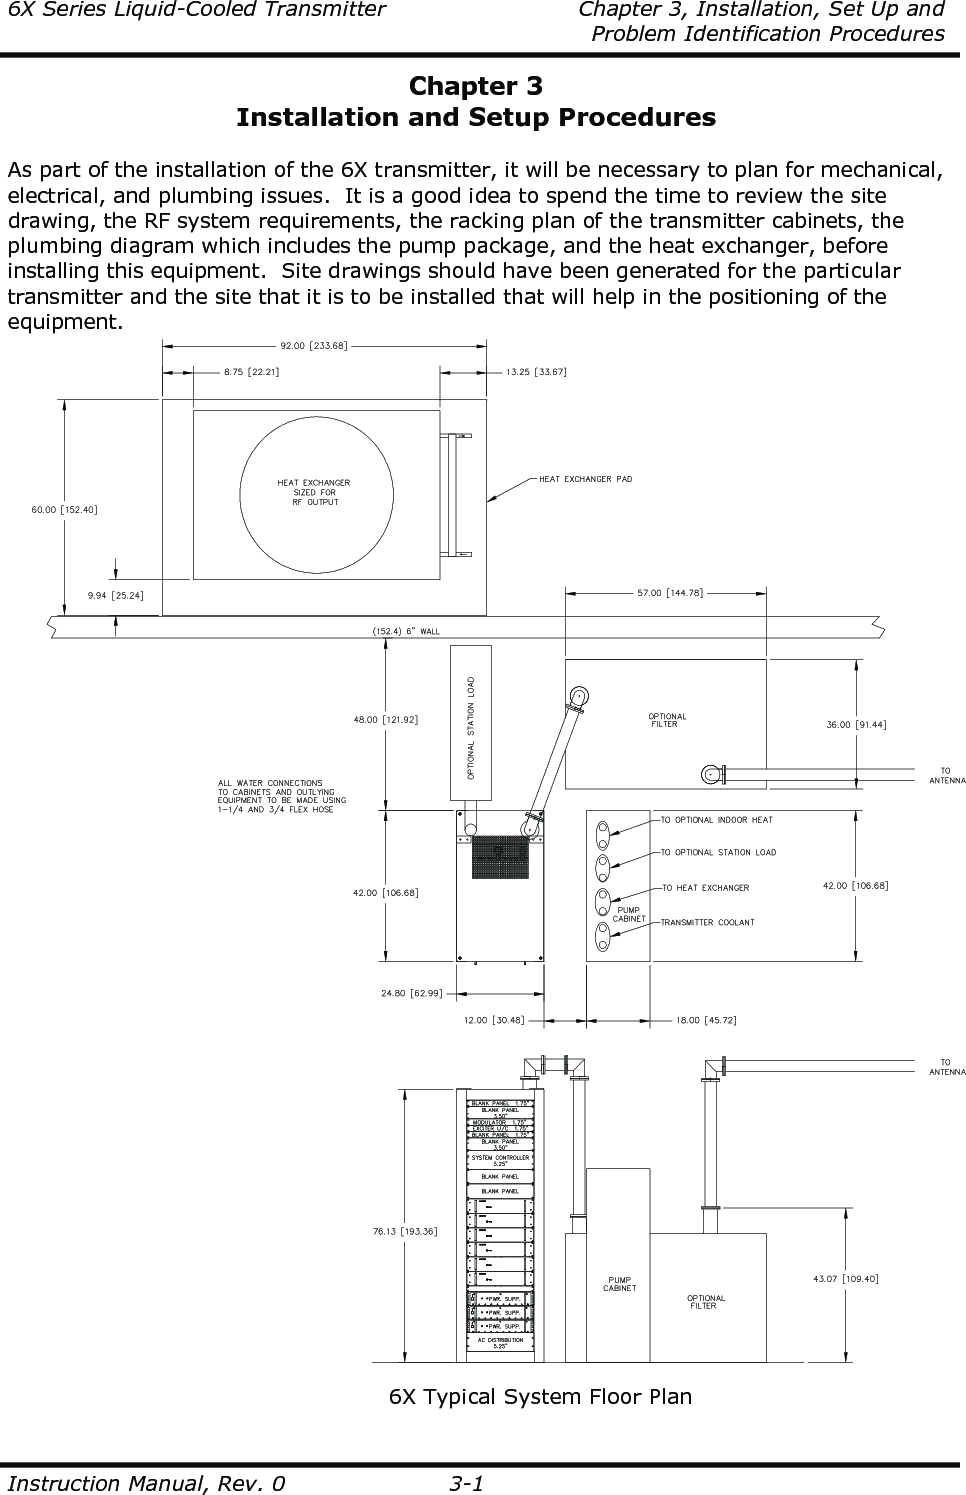 6X Series Liquid-Cooled Transmitter    Chapter 3, Installation, Set Up and     Problem Identification Procedures  Instruction Manual, Rev. 0  3-1 Chapter 3 Installation and Setup Procedures  As part of the installation of the 6X transmitter, it will be necessary to plan for mechanical, electrical, and plumbing issues.  It is a good idea to spend the time to review the site drawing, the RF system requirements, the racking plan of the transmitter cabinets, the plumbing diagram which includes the pump package, and the heat exchanger, before installing this equipment.  Site drawings should have been generated for the particular transmitter and the site that it is to be installed that will help in the positioning of the equipment.   6X Typical System Floor Plan 